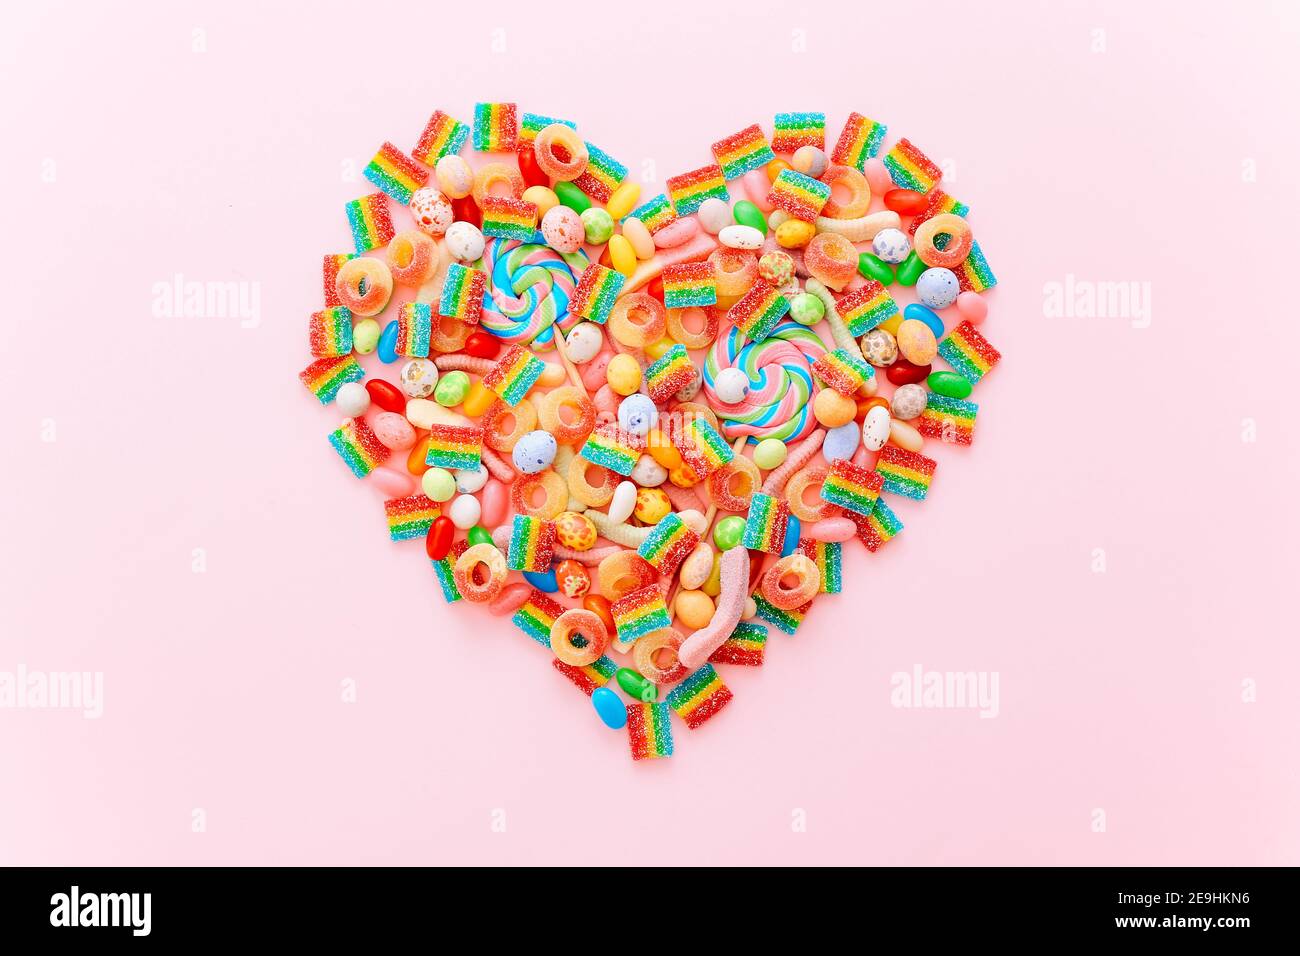 Heart made of colorful sugar candies on a pink background. Valentine's Day concept. Top view, flat lay. Stock Photo